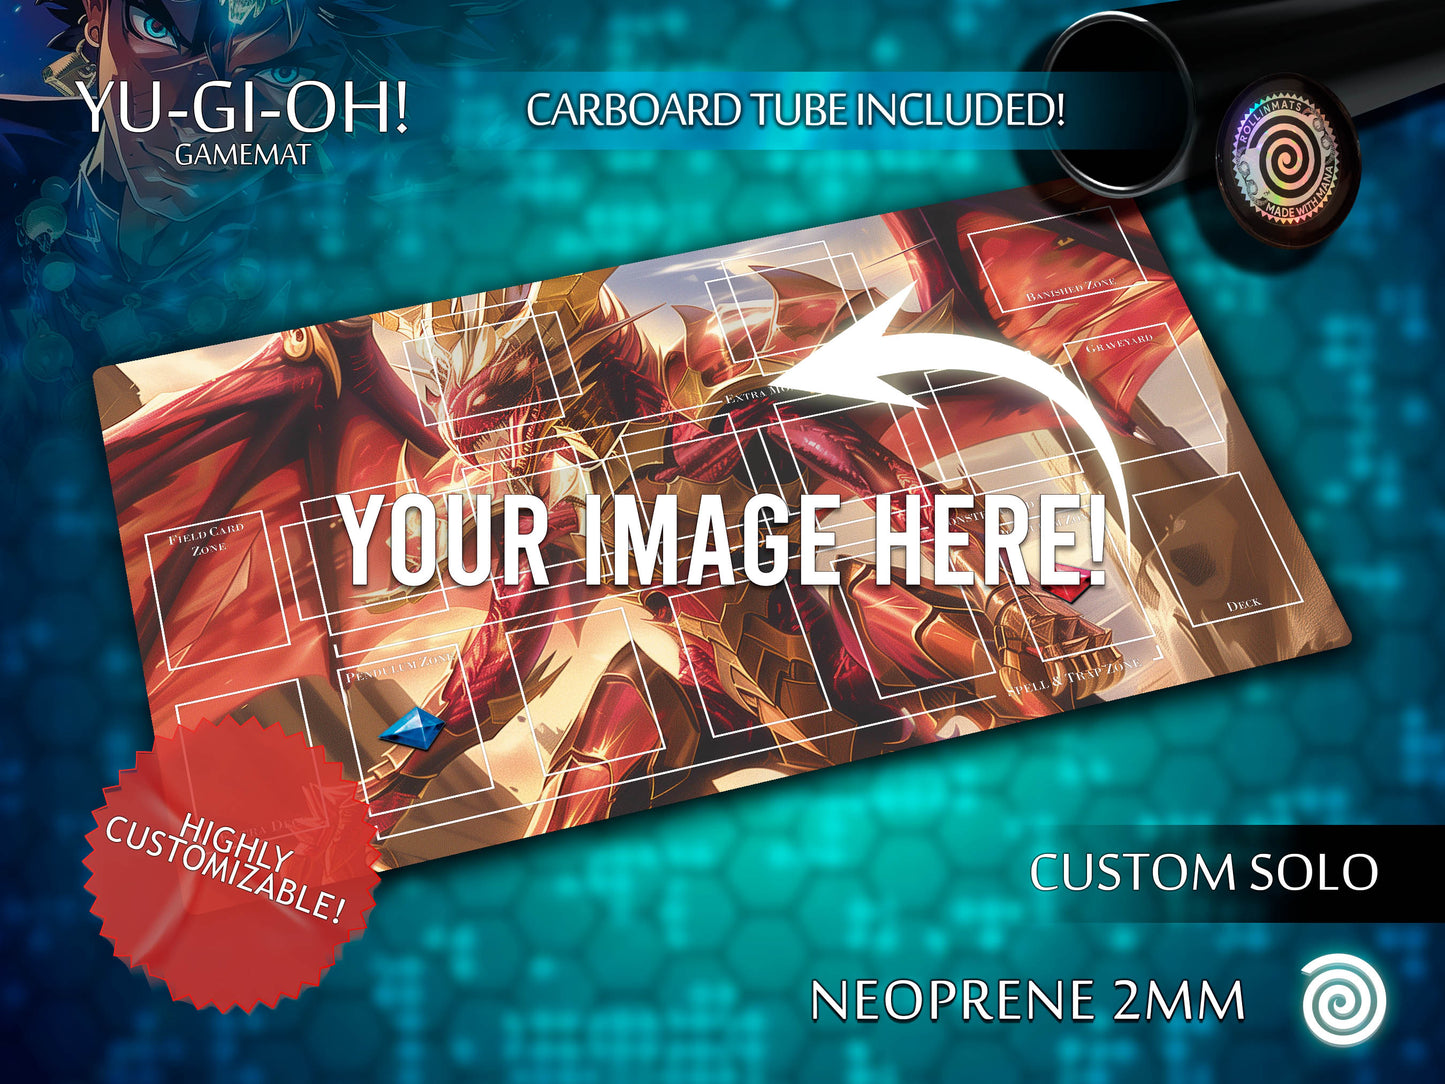 YU-GI-OH! Trading Card Game compatible Playmats